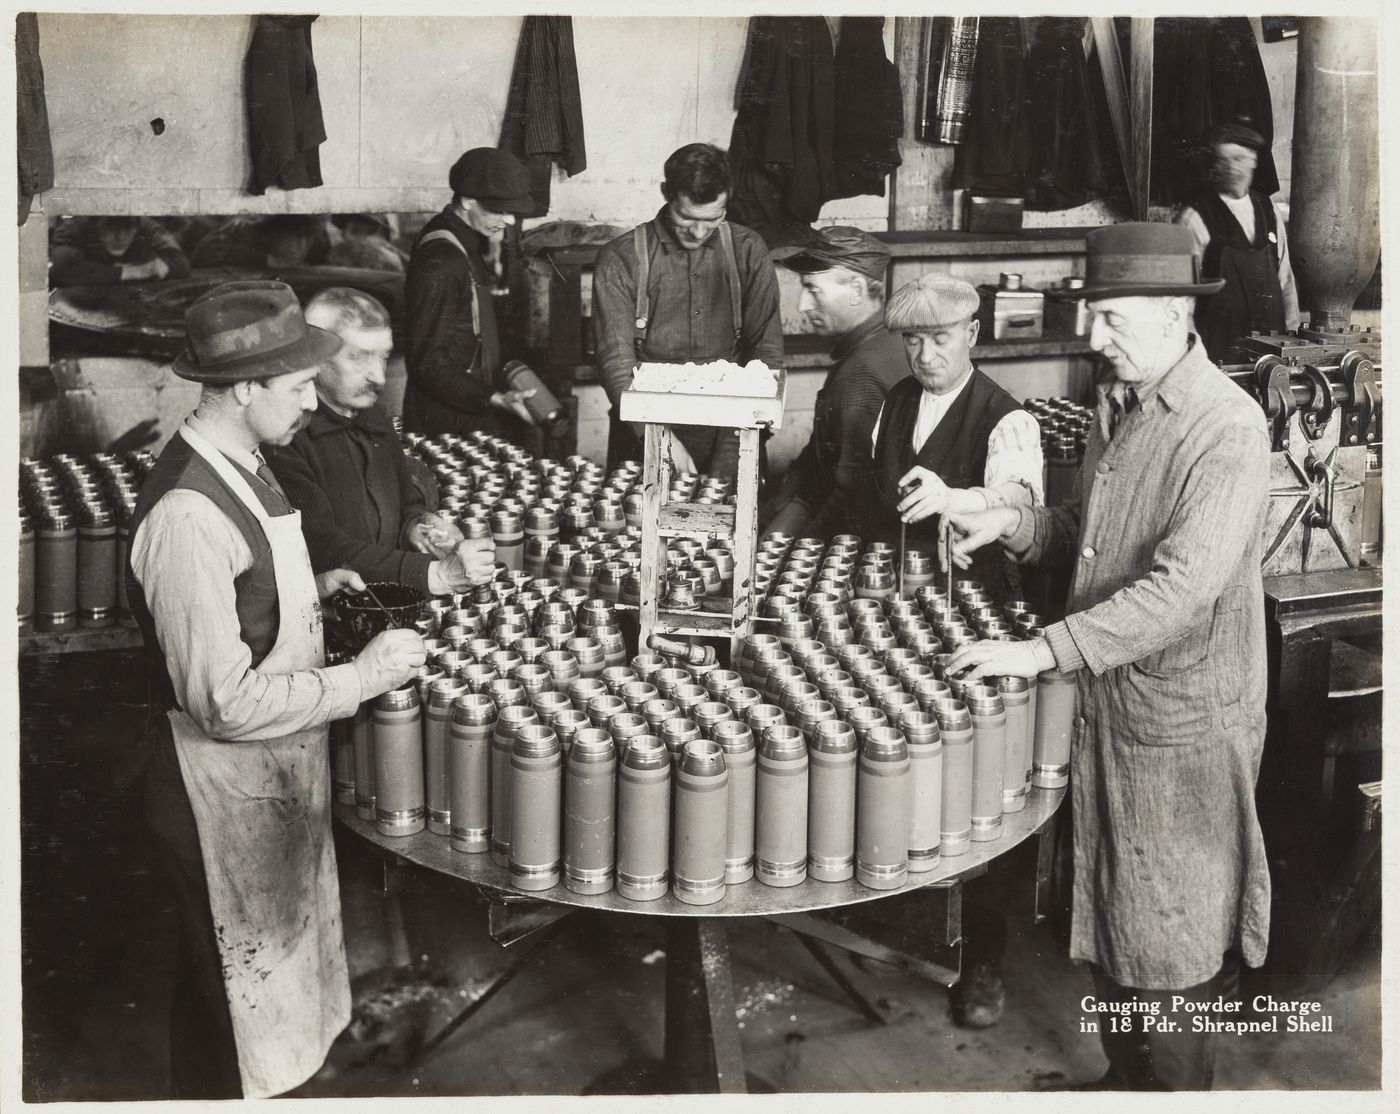 Interior view of workers gauging powder charge in shrapnel shell at the Energite Explosives Plant No. 3, the Shell Loading Plant, Renfrew, Ontario, Canada